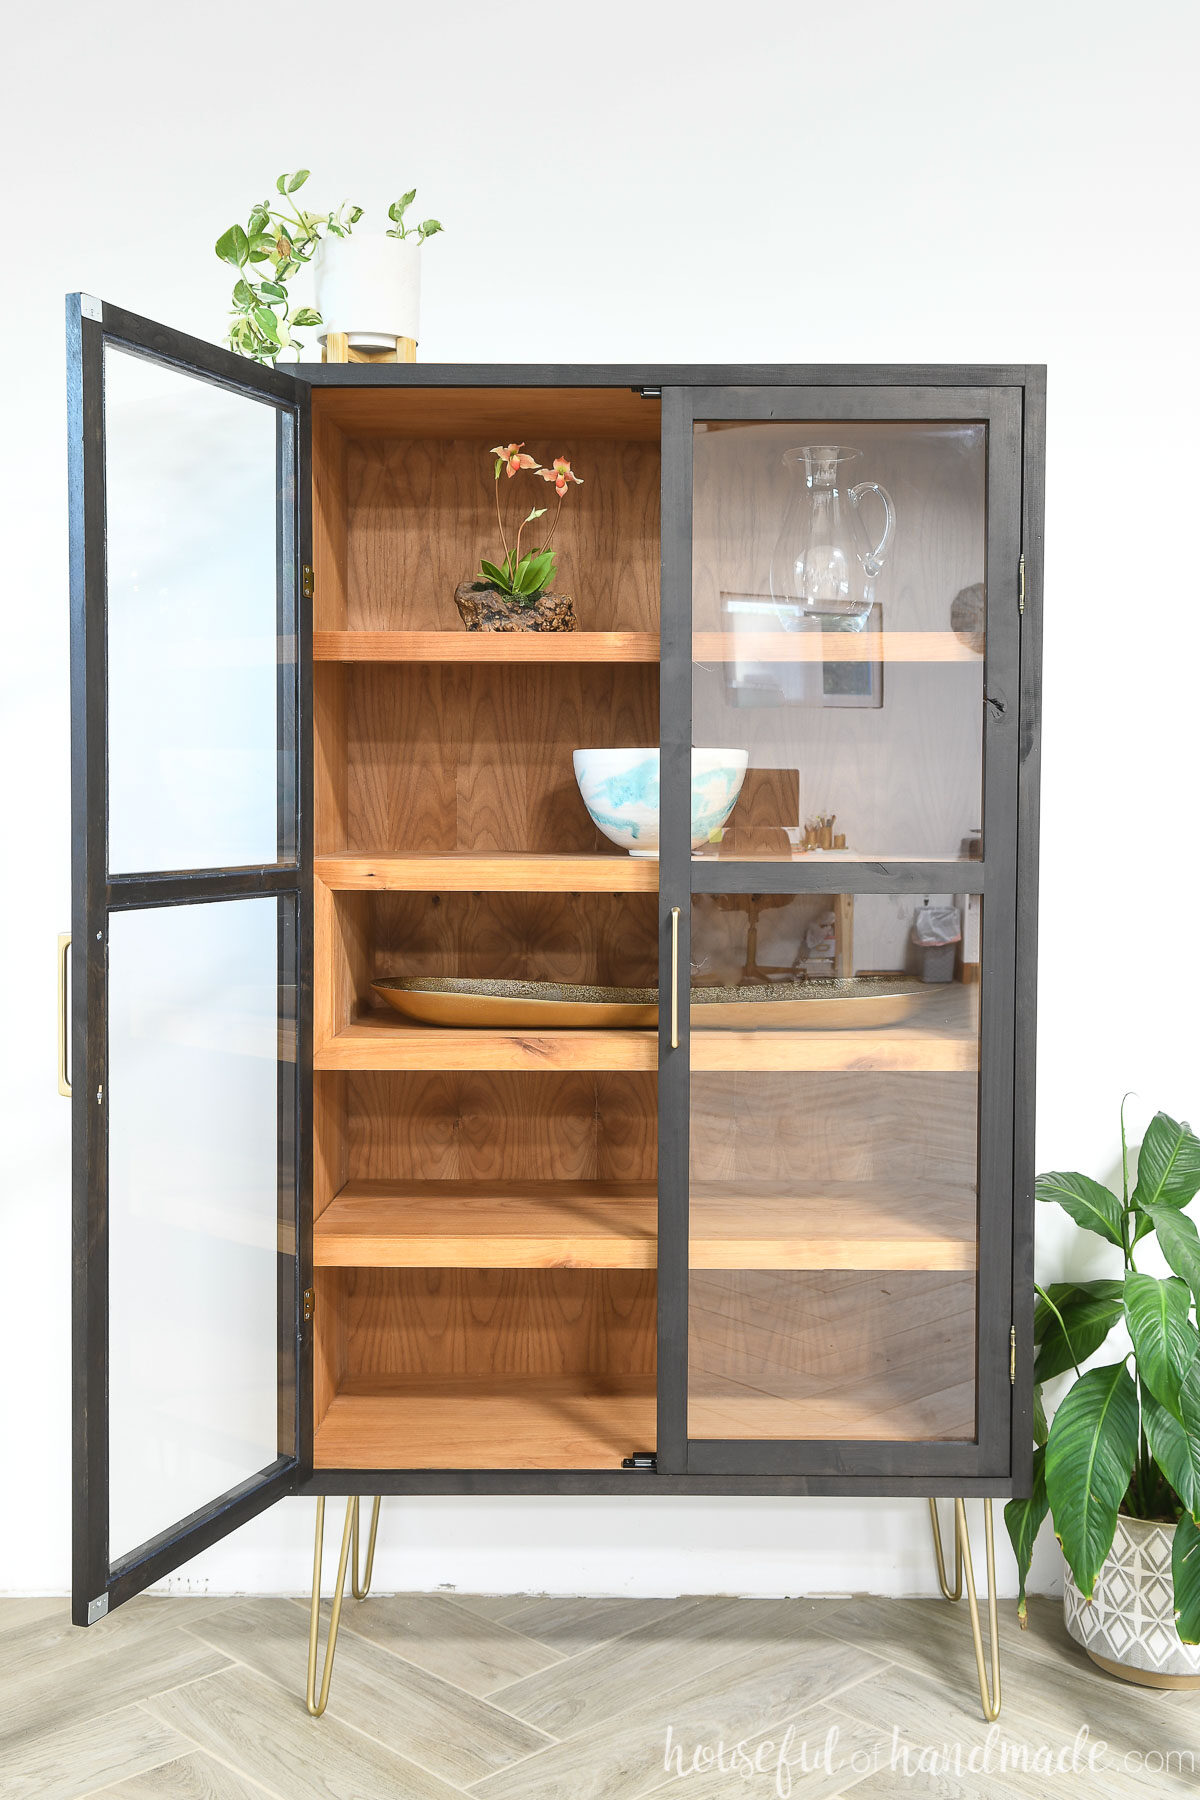 DIY modern display cabinet with two panel glass doors, one open showing the shelves inside.